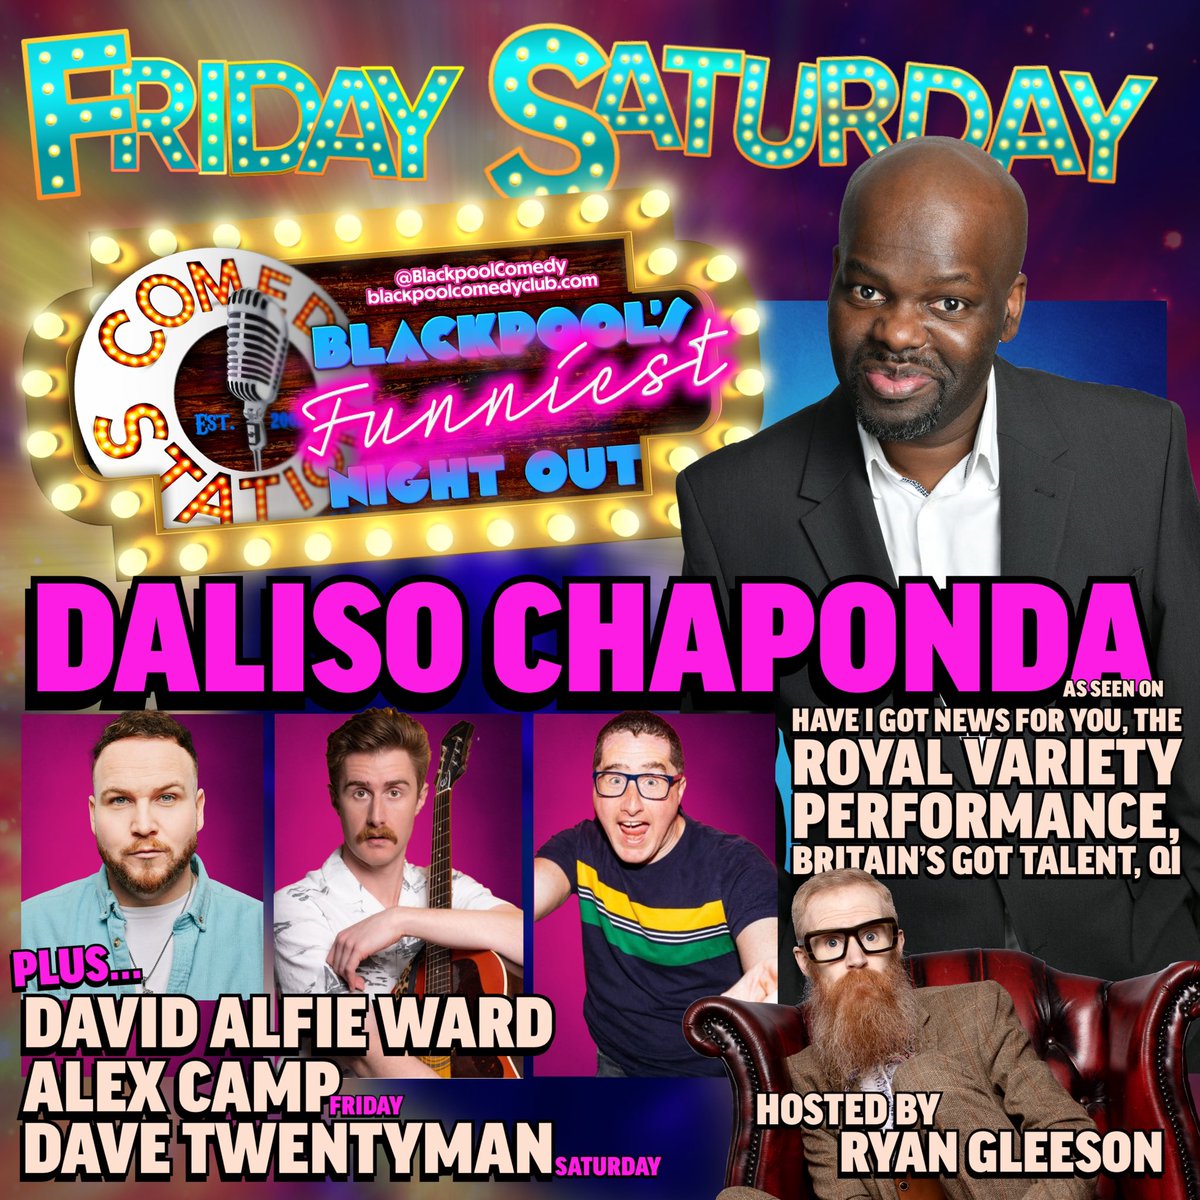 This weekend is gonna be awesome! Friday & Saturday, Daliso Chaponda headlines, with David Alfie Ward & Ryan Gleeson. On Friday, they’re joined by Alex Camp & Dave Twentyman on Saturday Doors 7pm - Tix & info: blackpoolcomedyclub.com